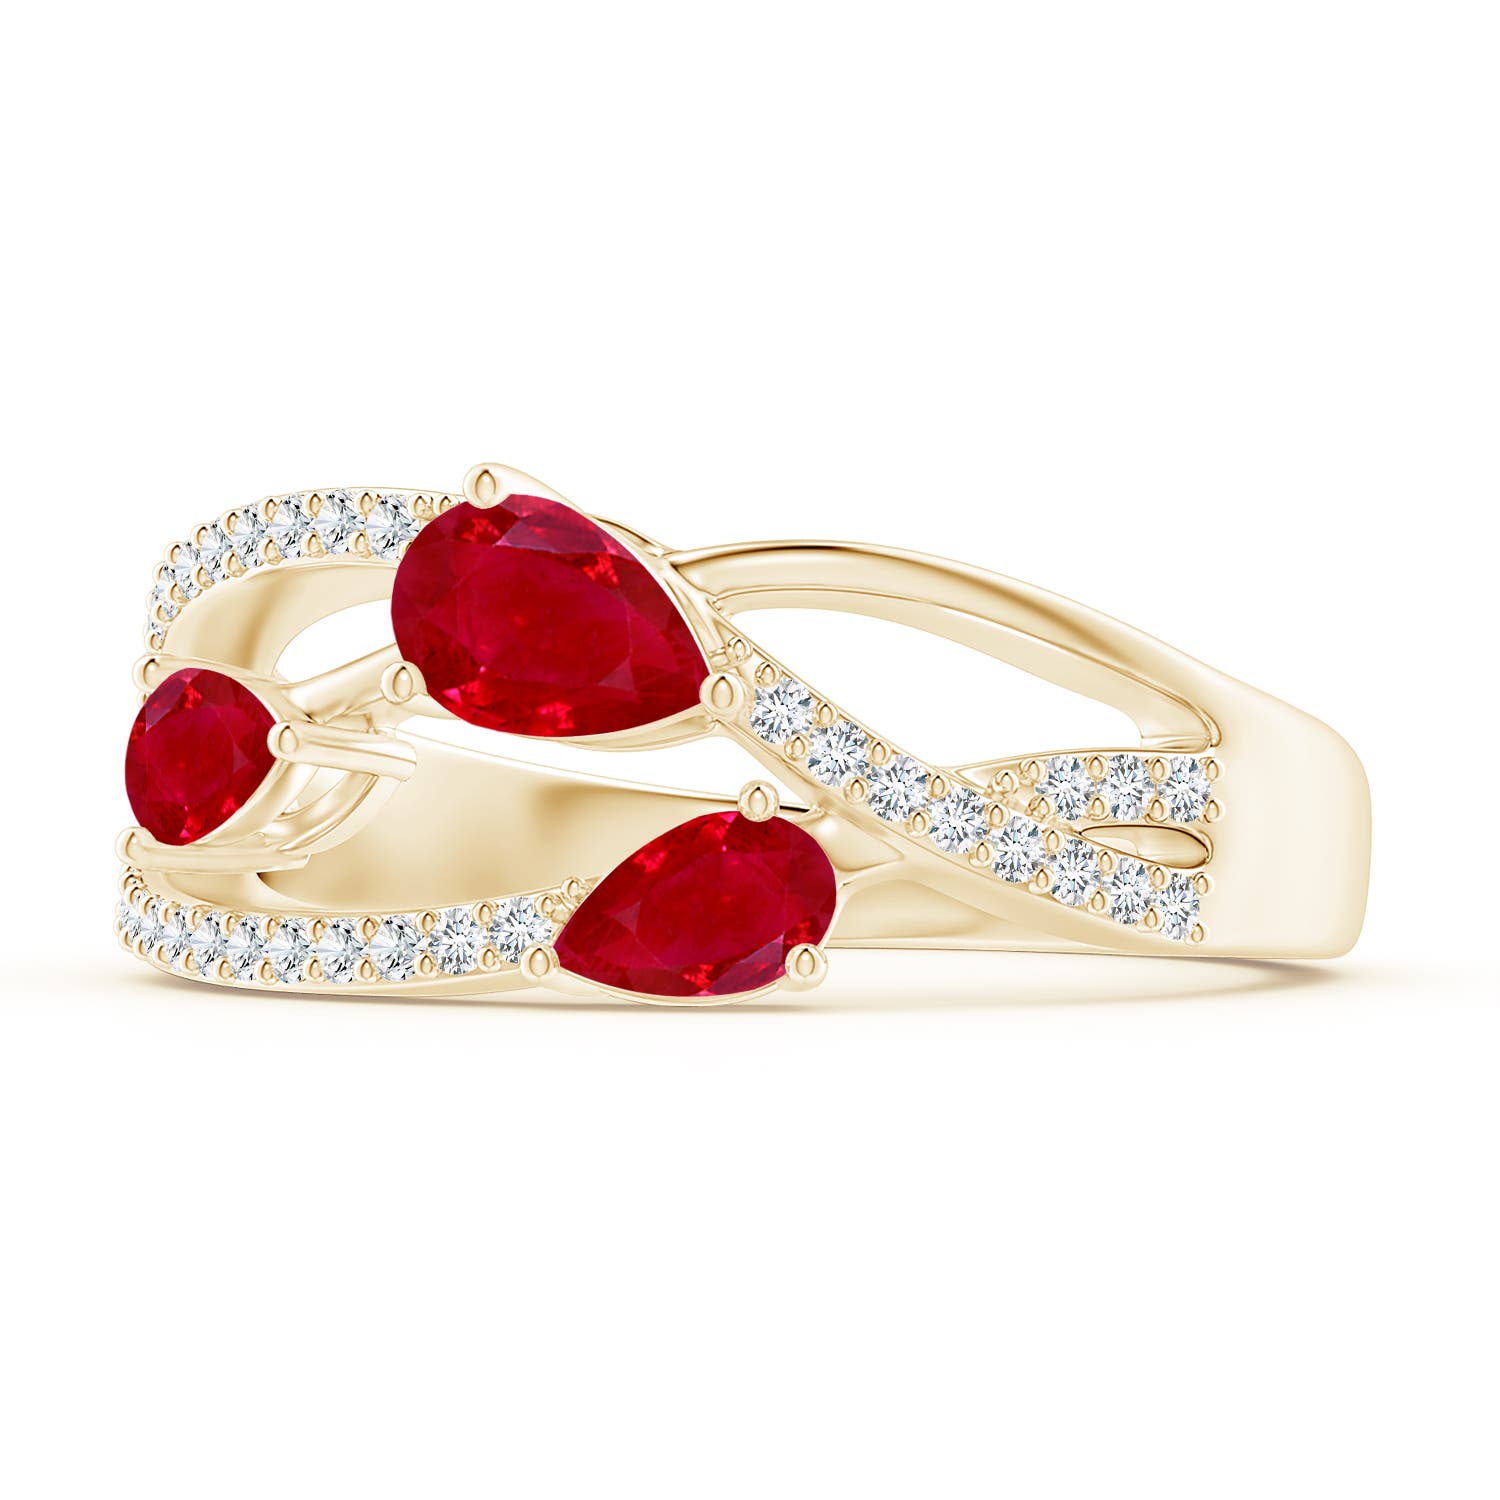 AAA - Ruby / 1.03 CT / 14 KT Yellow Gold